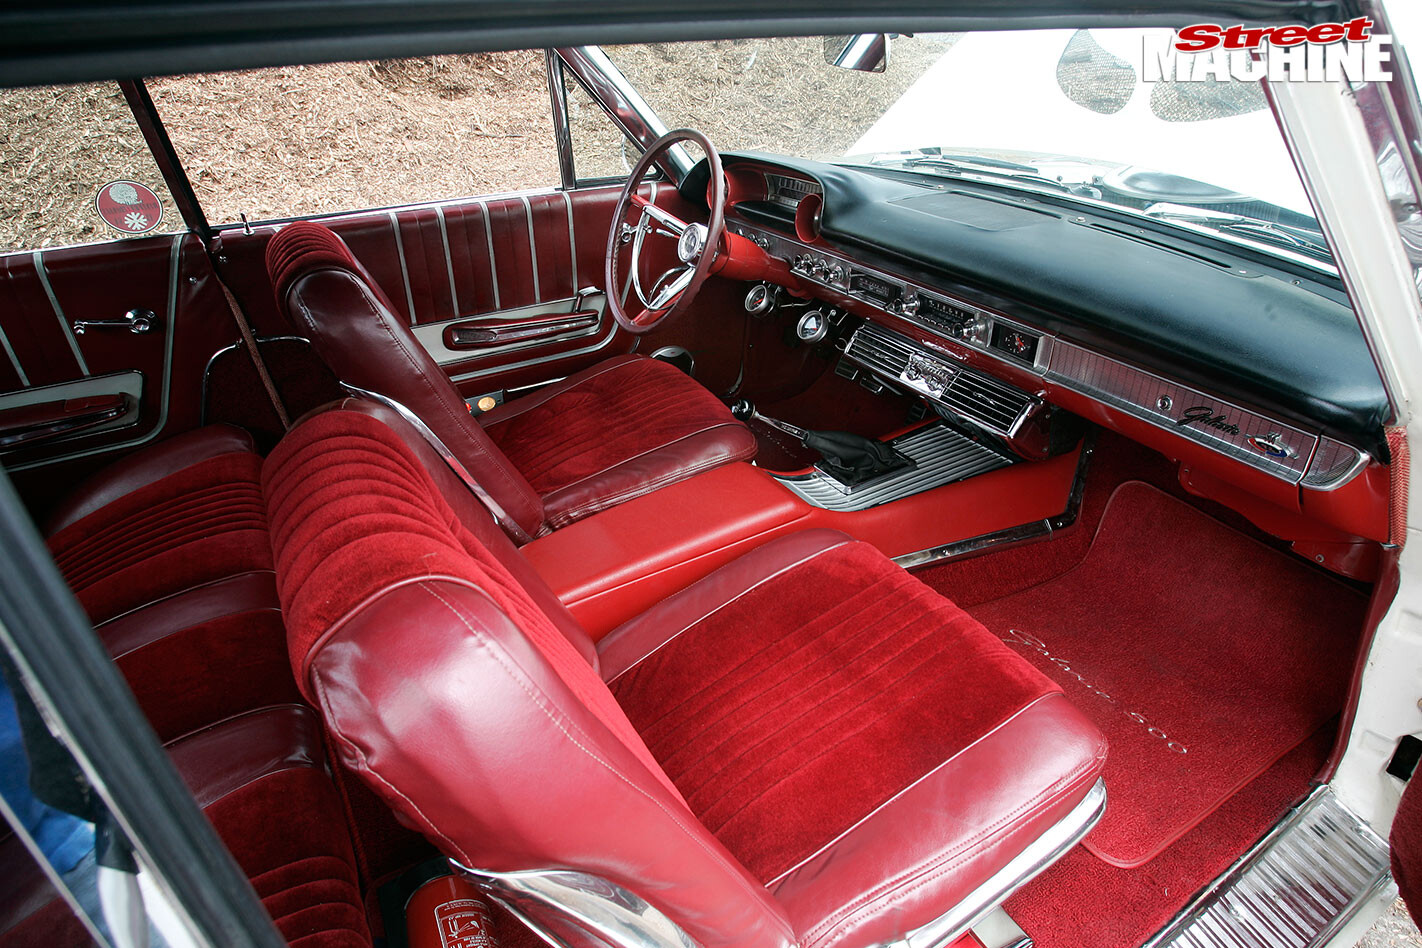 Ford Galaxie XL500 interior front